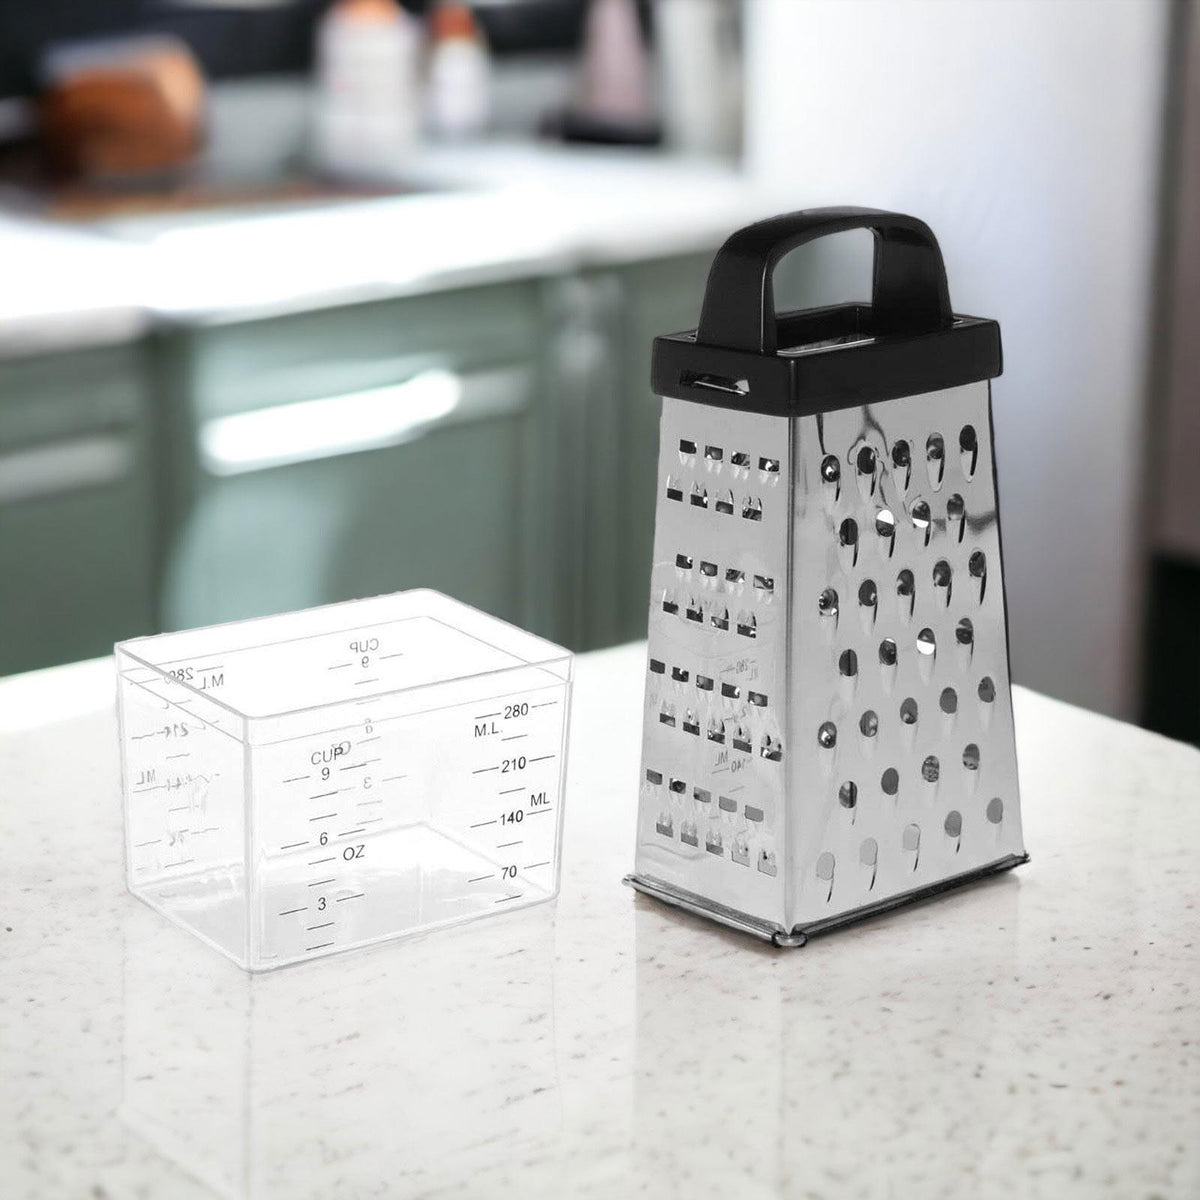 https://www.idealtextiles.shop/wp-content/uploads/1699/14/get-premium-every-day-4-sided-box-grater-aubina-at-unbeatable-prices-on-our-website_0.jpg